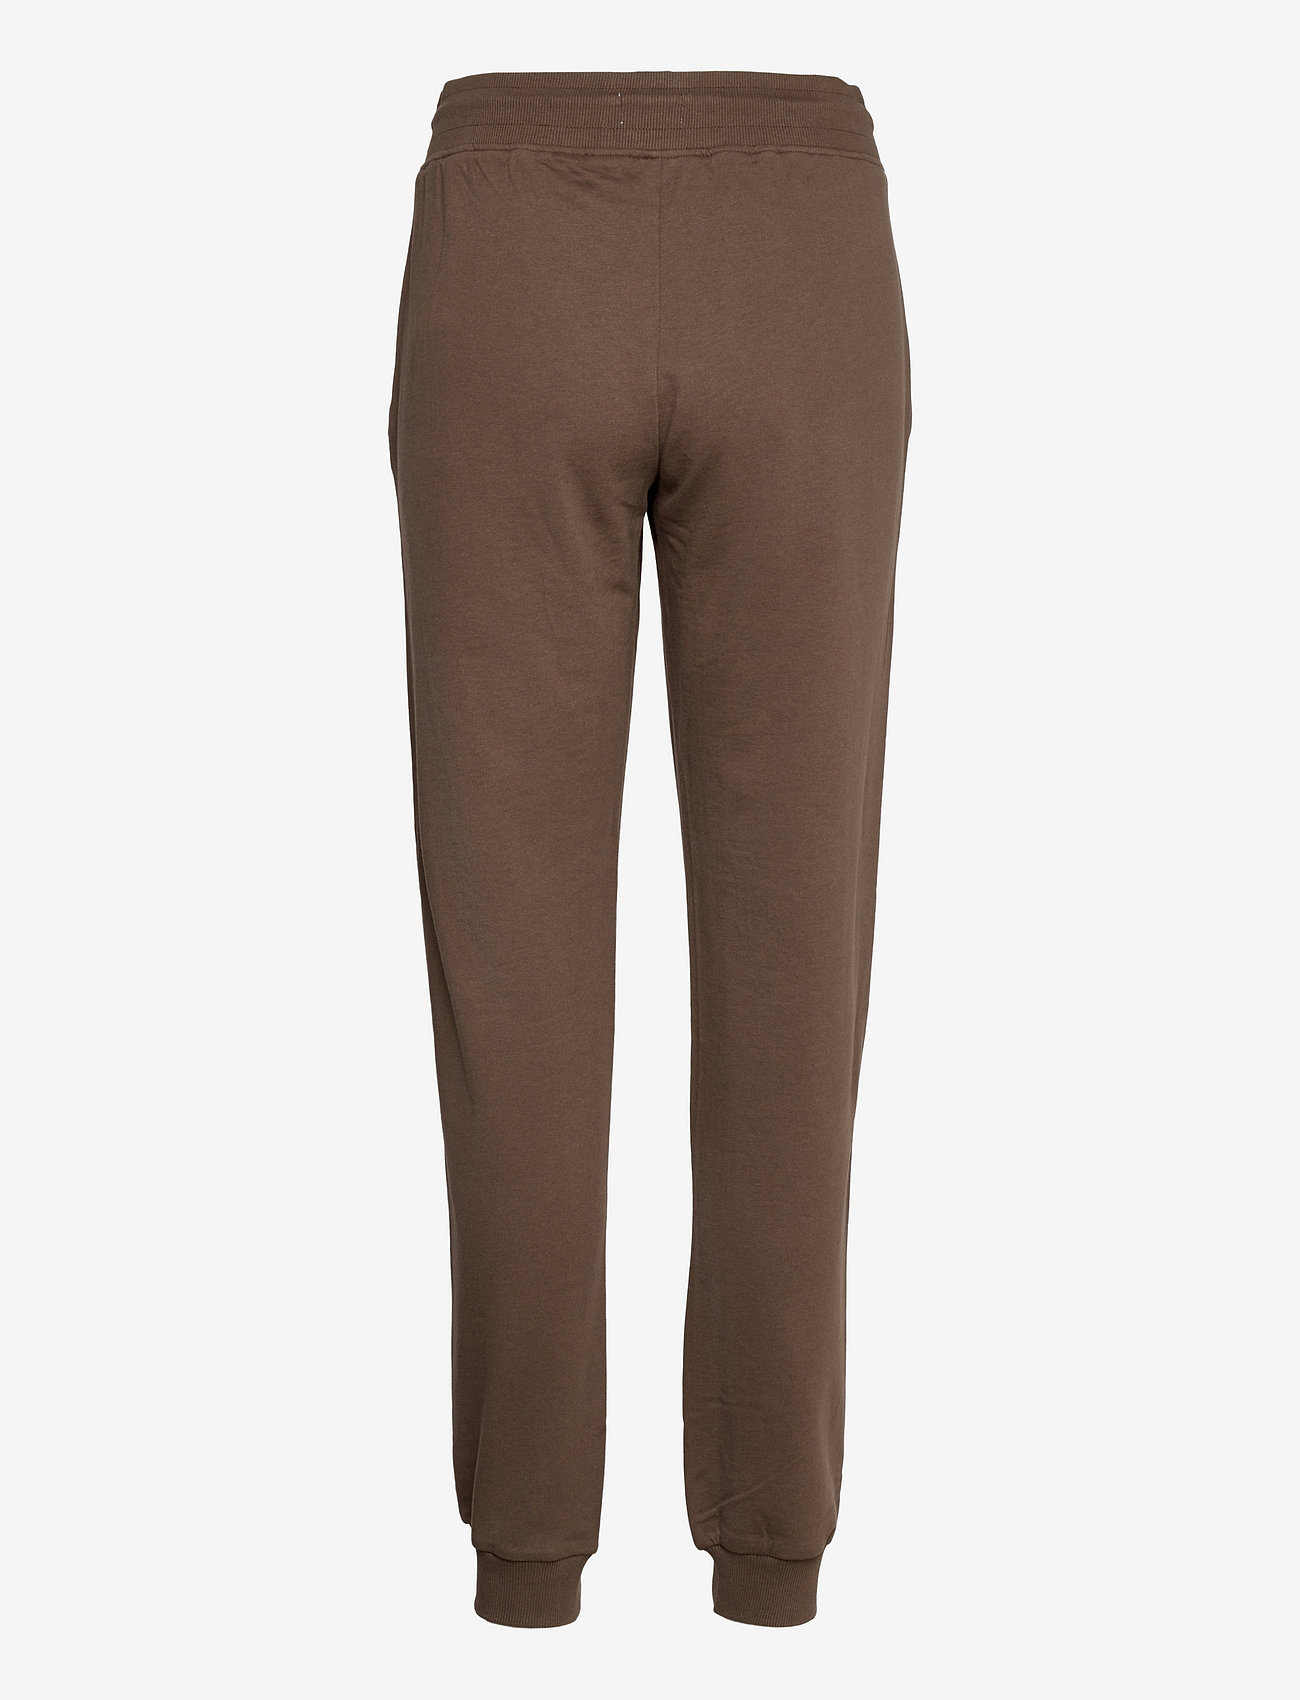 Bread & Boxers - Lounge pant - pysjbukser - earth brown - 1